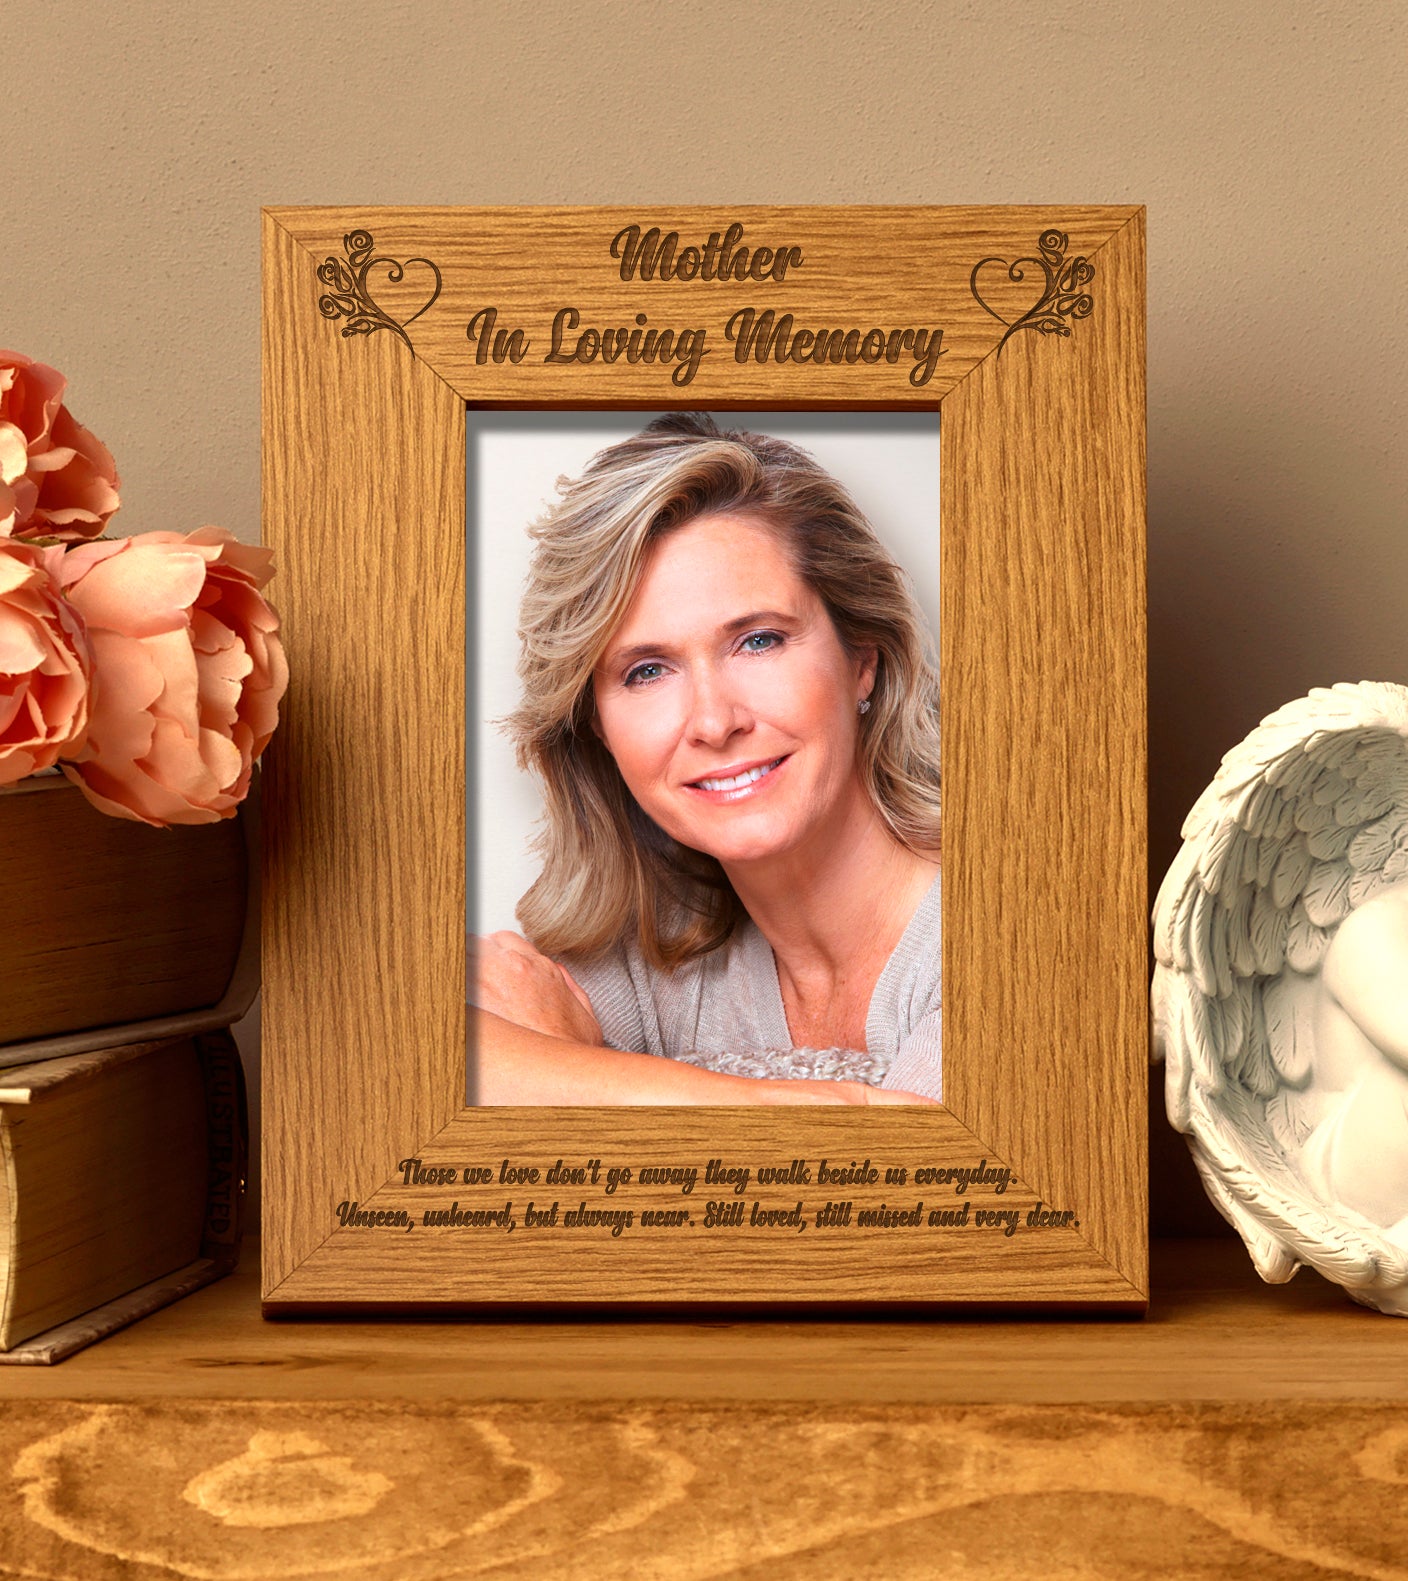 Mother In Loving Memory Remembrance Portrait Wooden Photo Frame Gift - ukgiftstoreonline